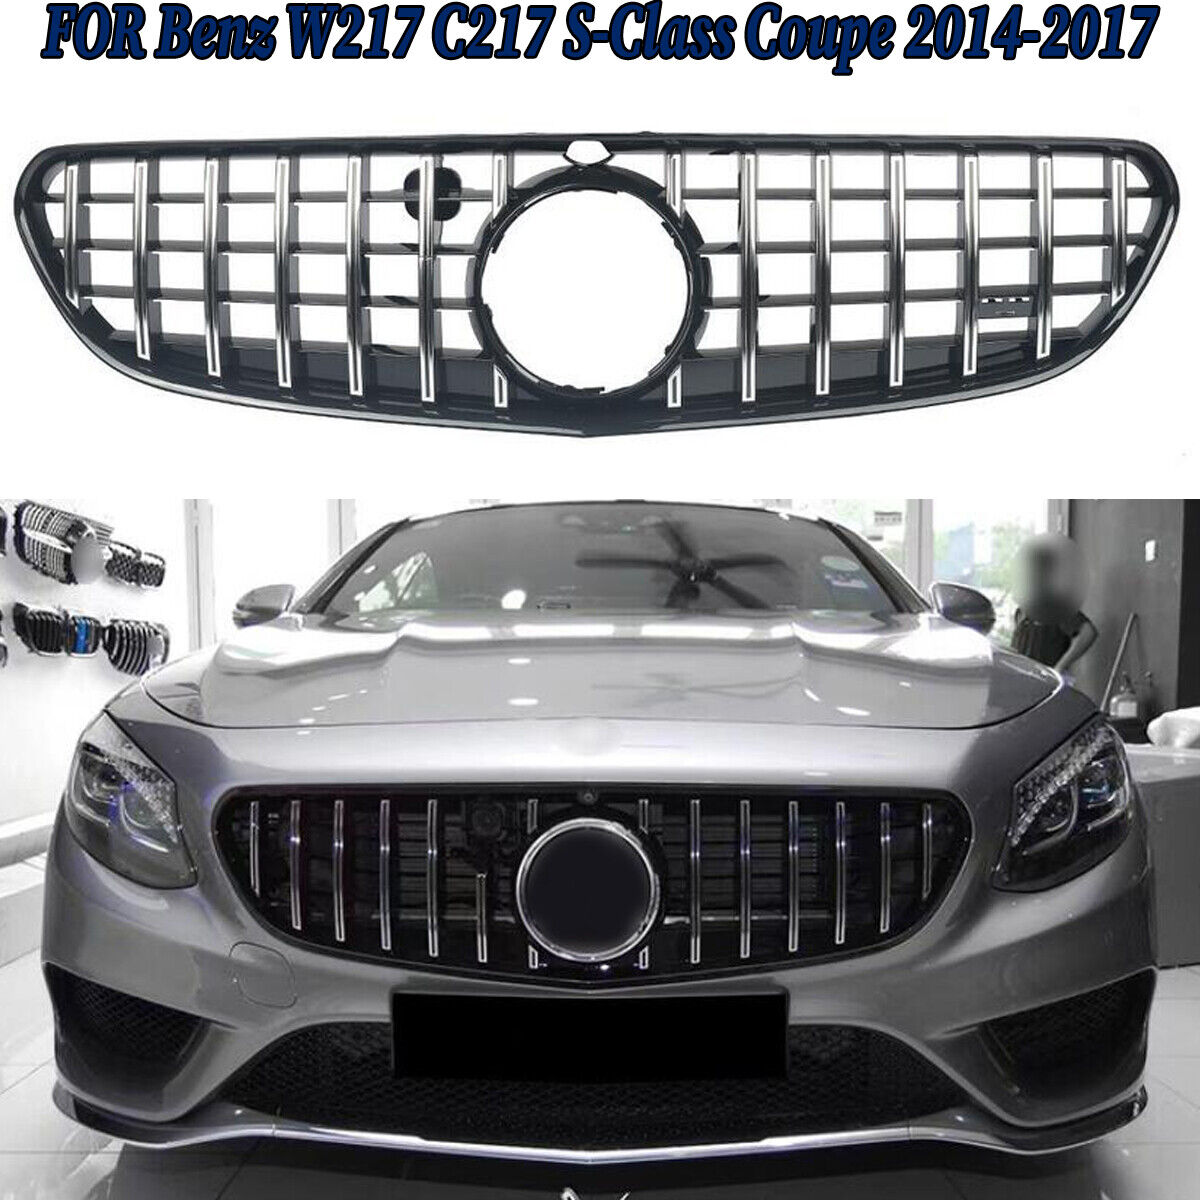 For 2014-2017 Mercedes-Benz C217 W217 S-Class Coupe GT Style Front Bumper Grille